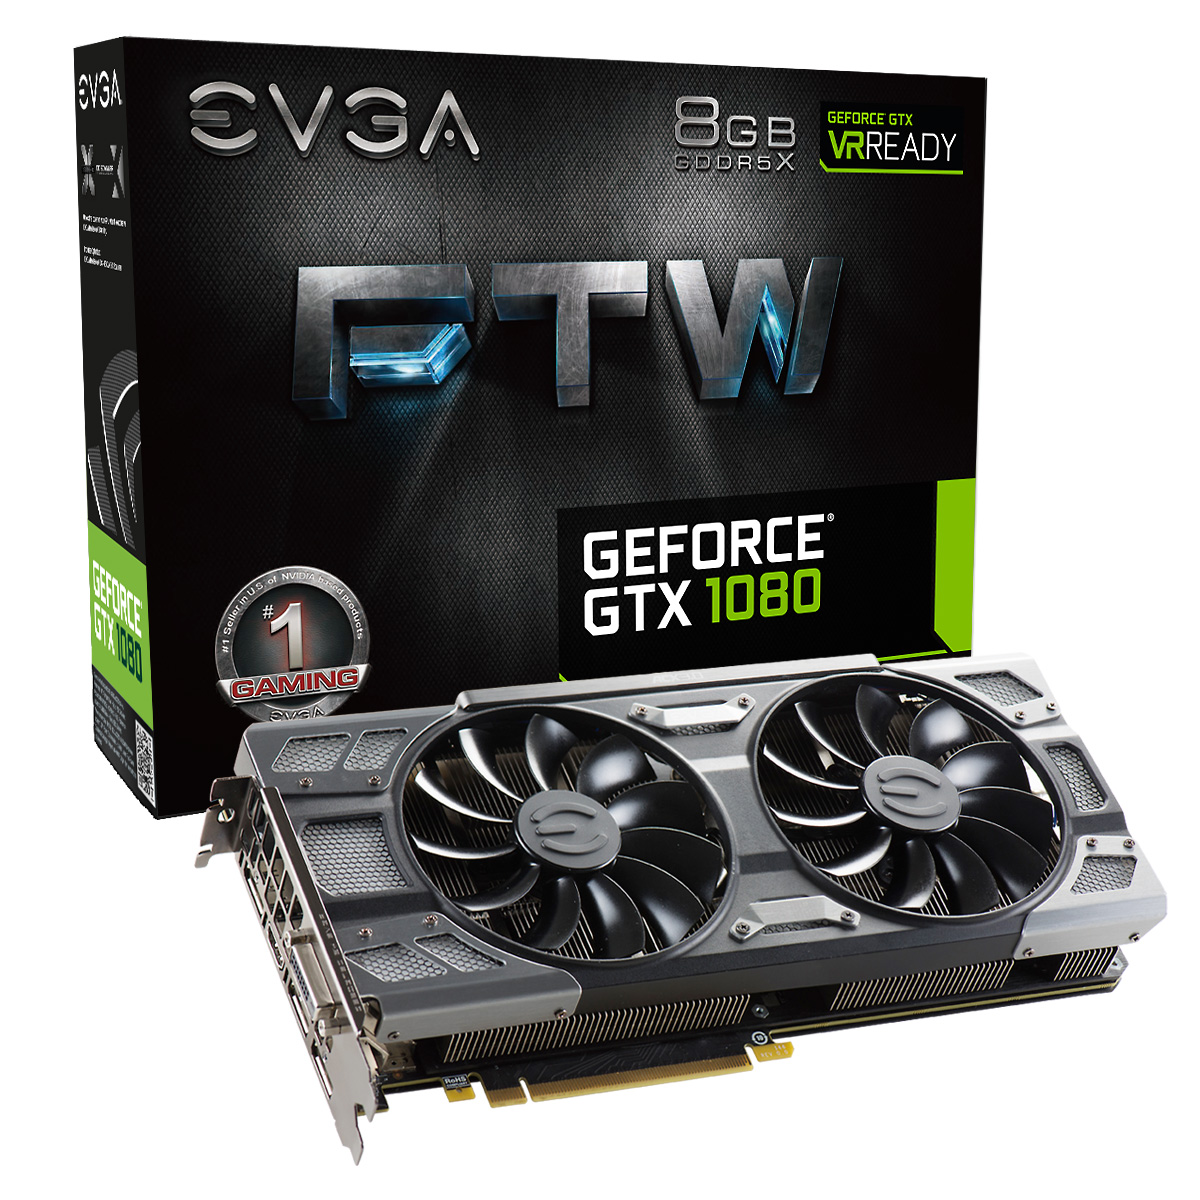 Media asset in full size related to 3dfxzone.it news item entitled as follows: EVGA annuncia cinque video card GeForce GTX 1080, reference e non | Image Name: news24333_EVGA-GeForce-GTX-1080-FTW-GAMING-ACX-3_1.jpg